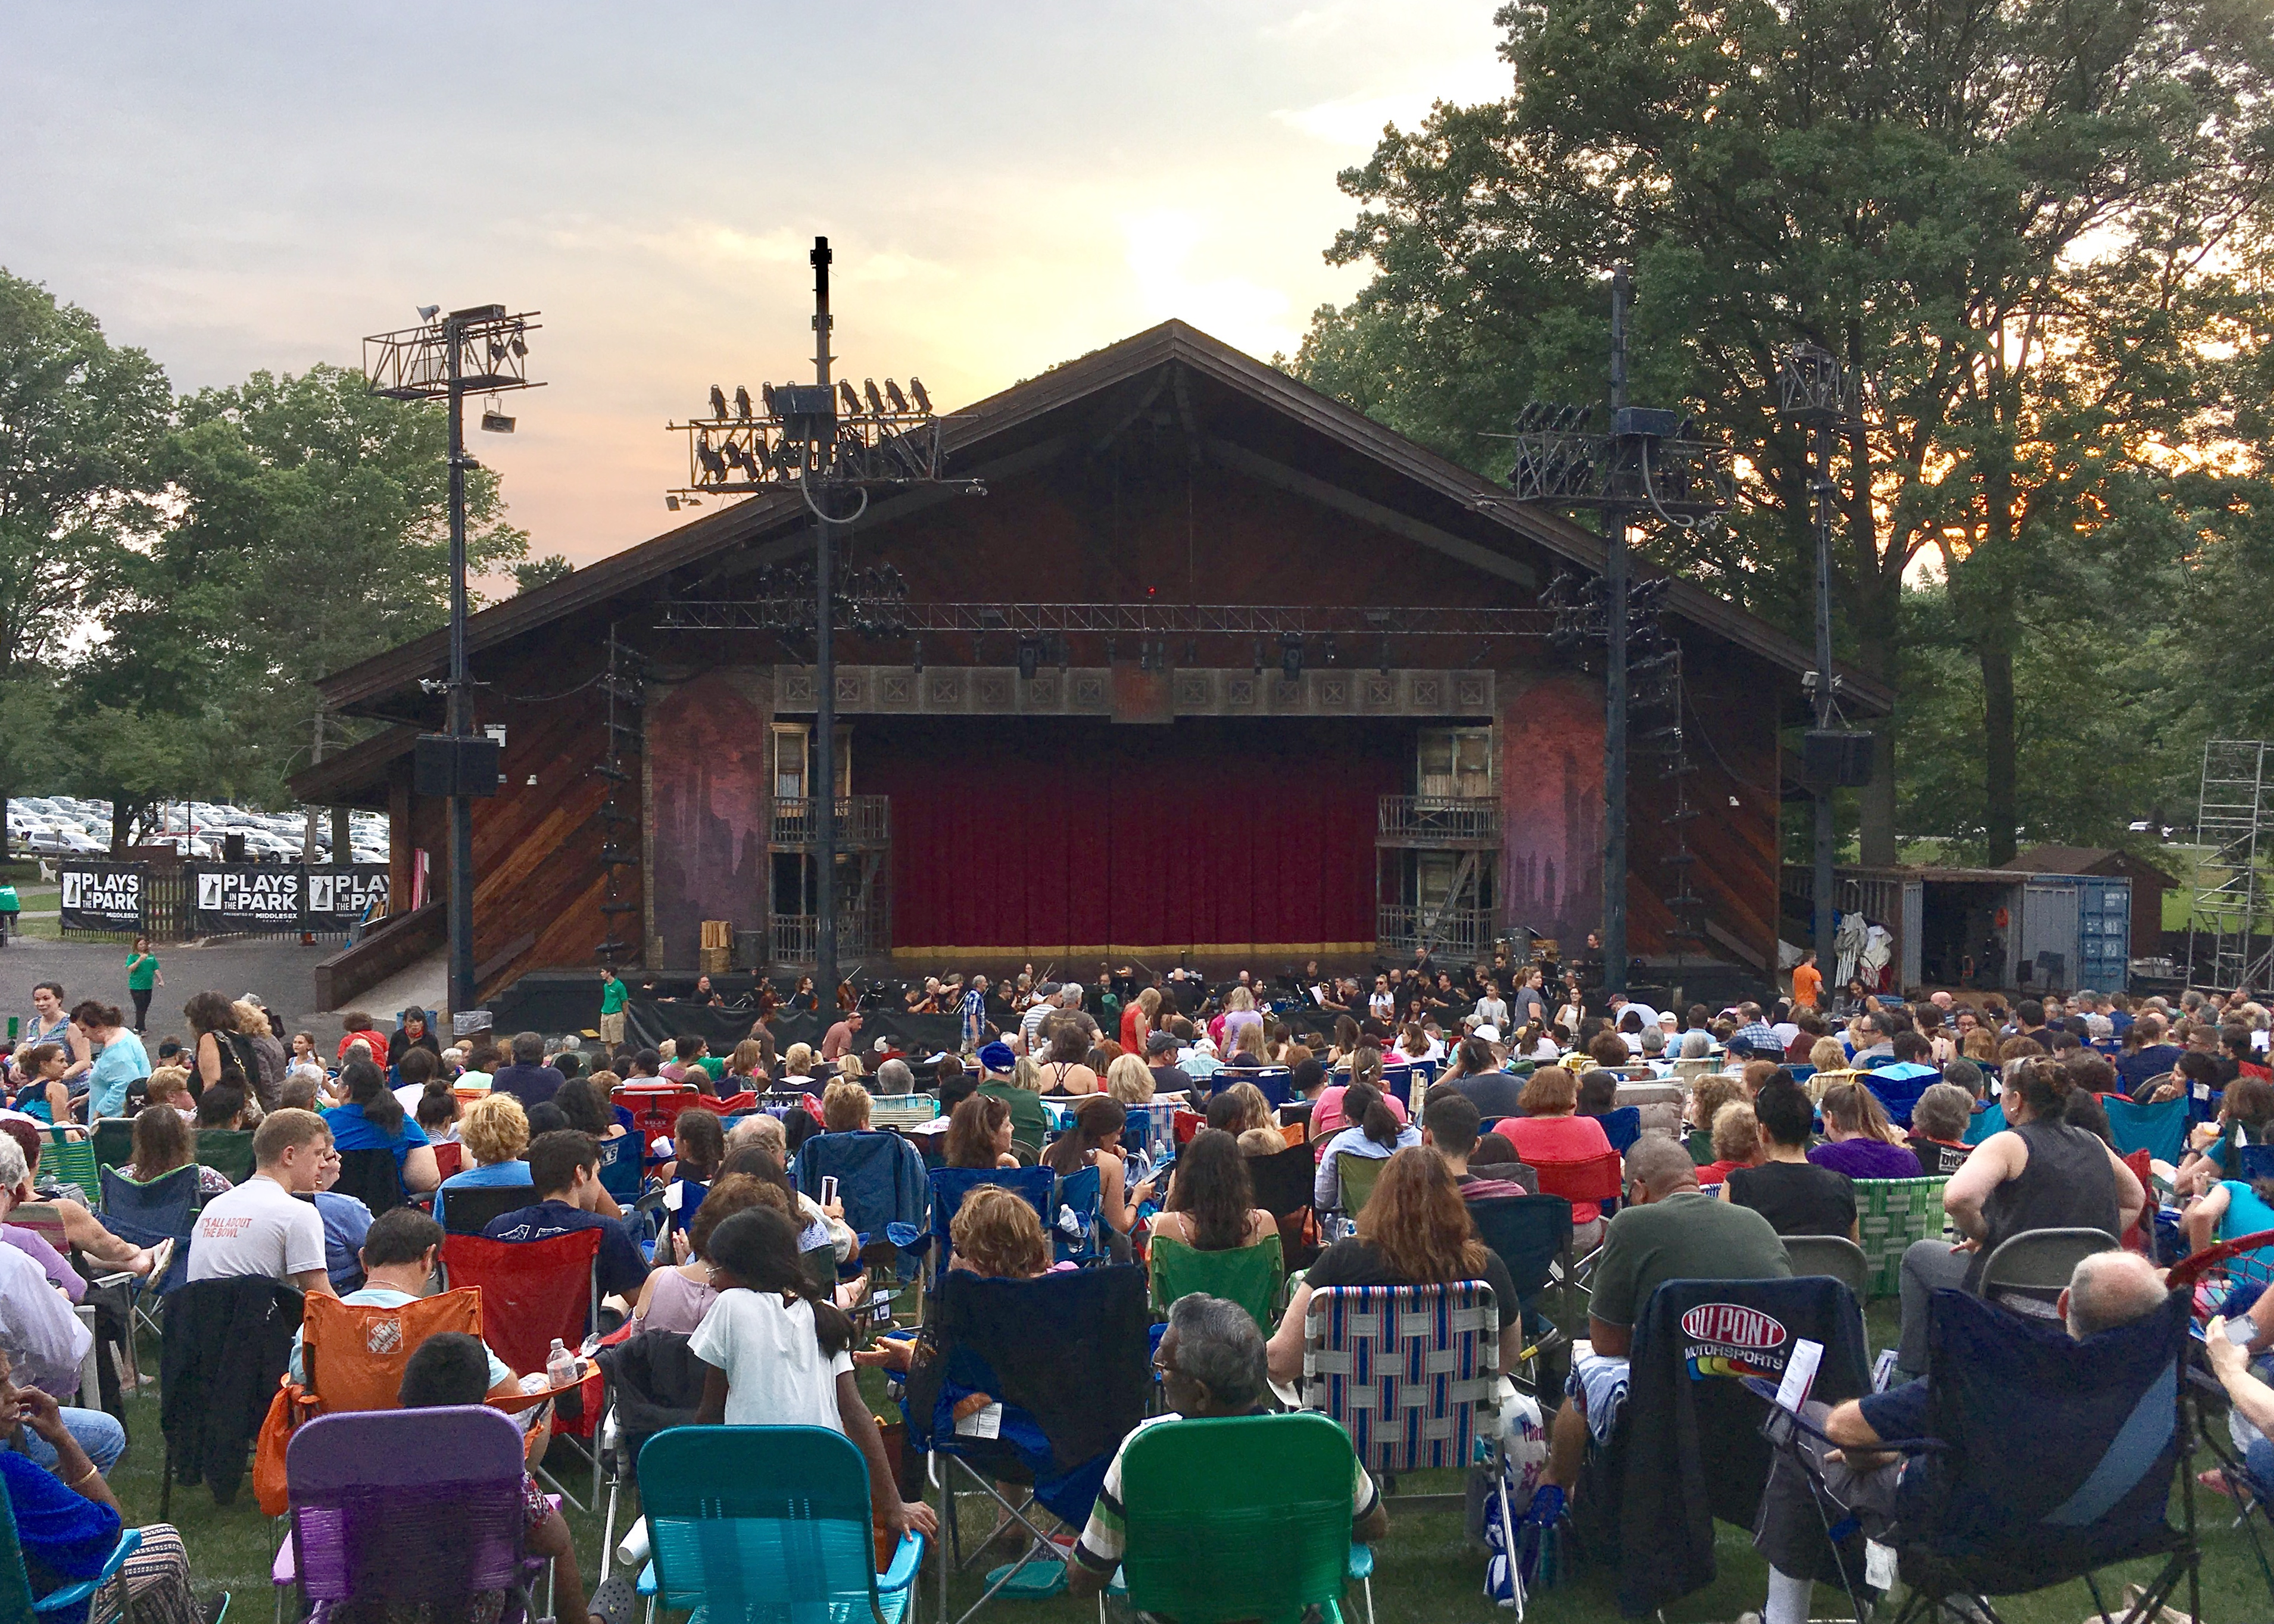 Middlesex County's Plays-in-the-Park returns this summer with three musicals